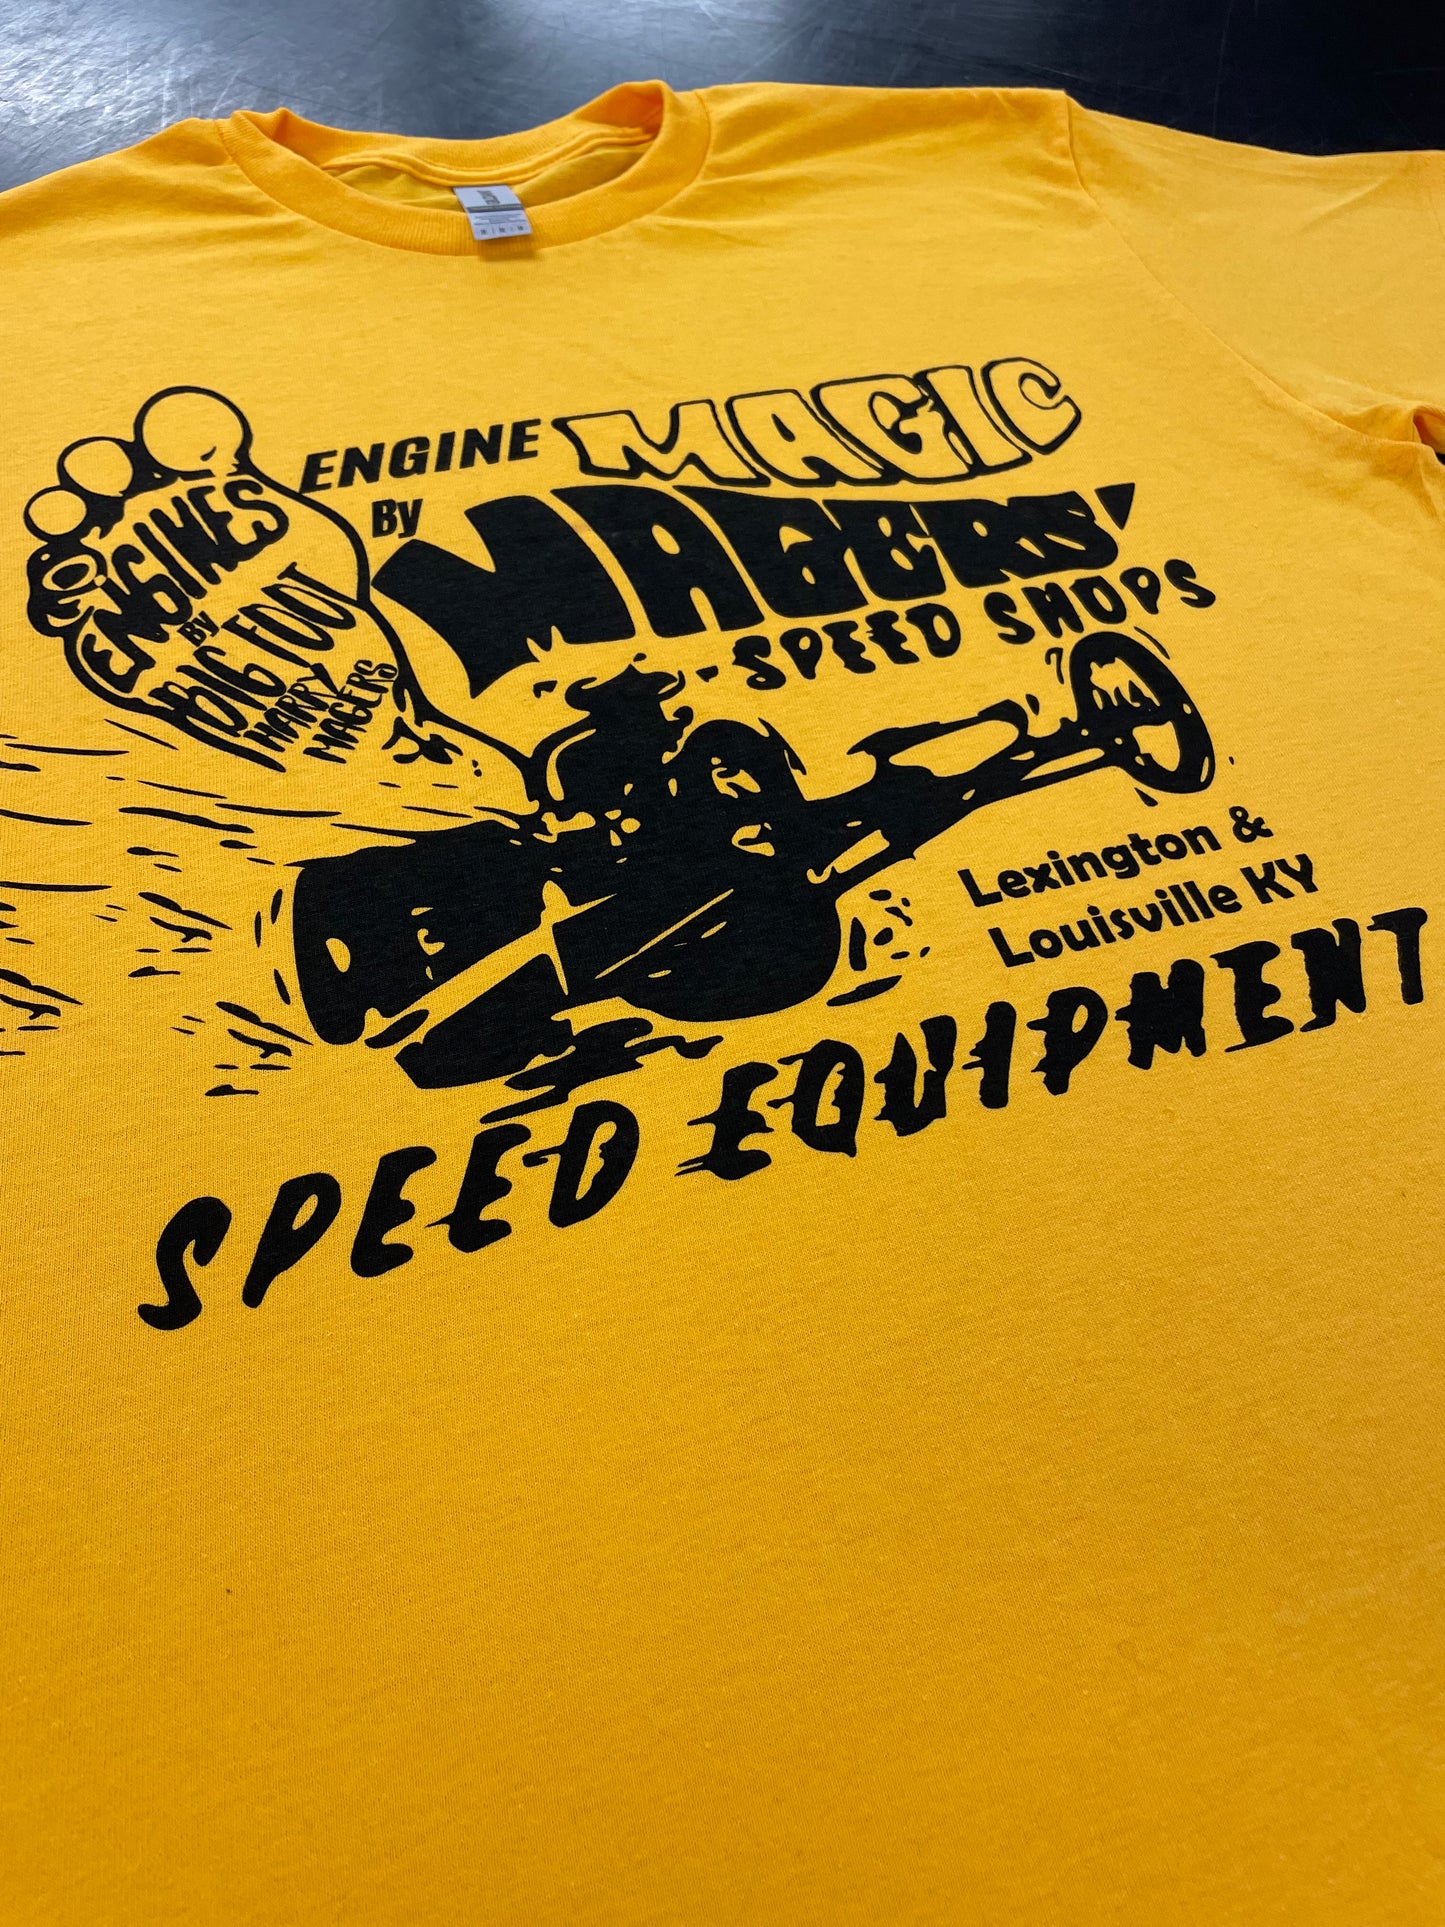 Magers' Speed Shop Shirt